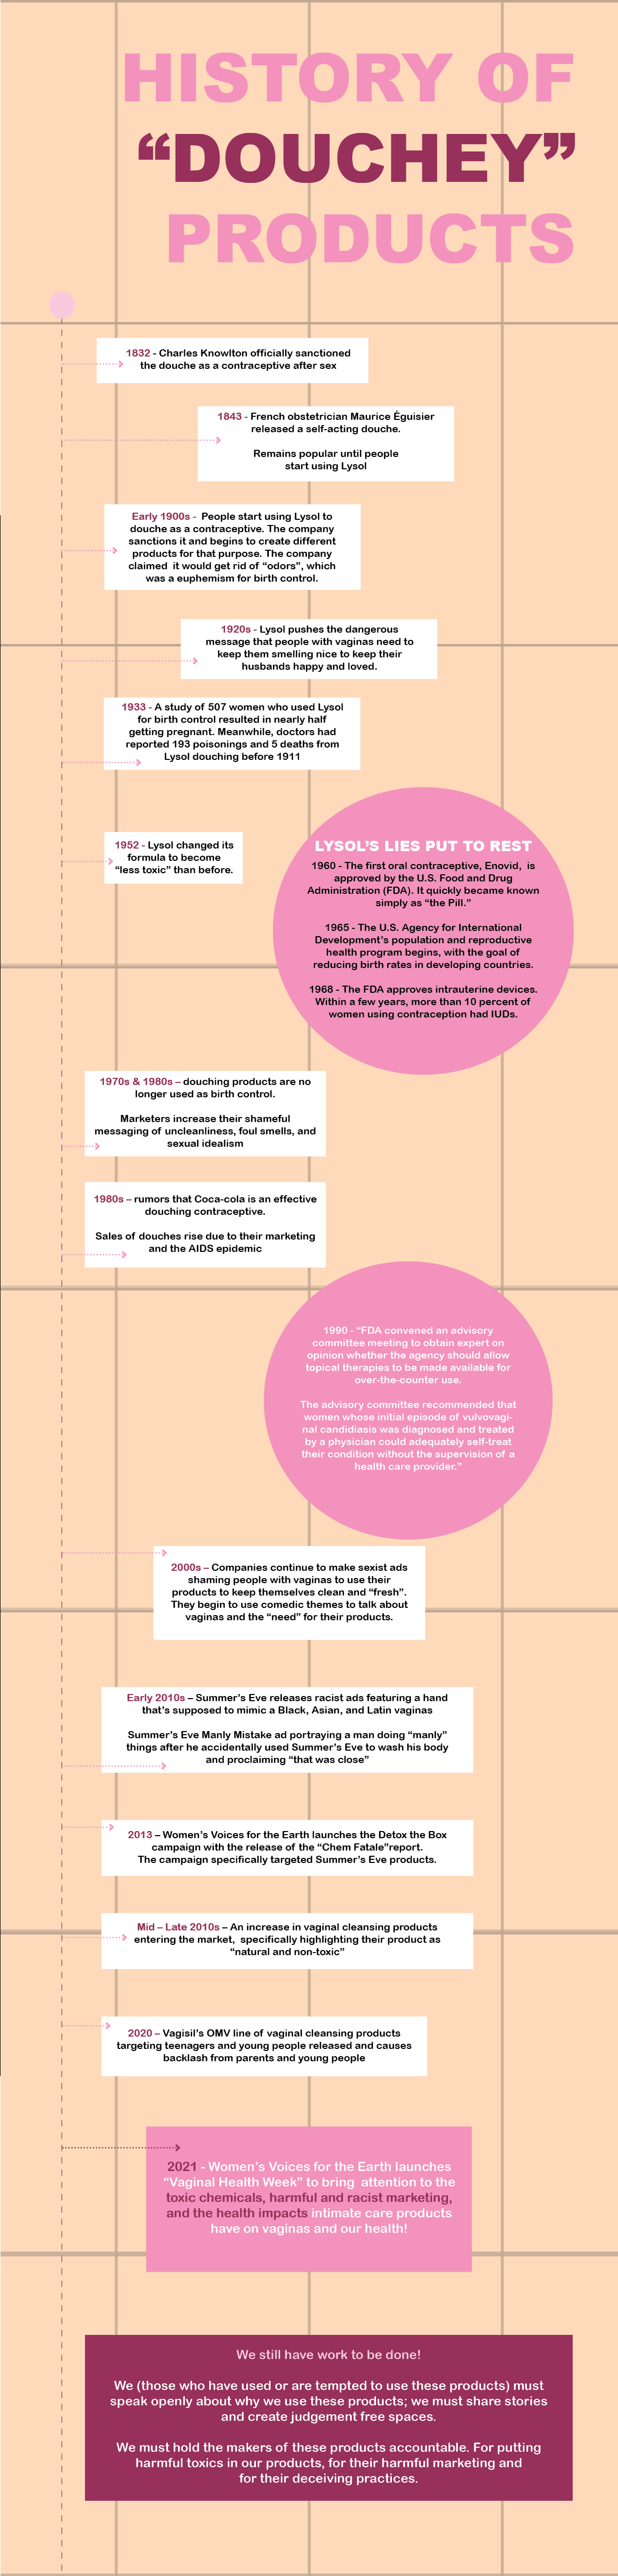 Timeline of Intimate Care Products - Infographic